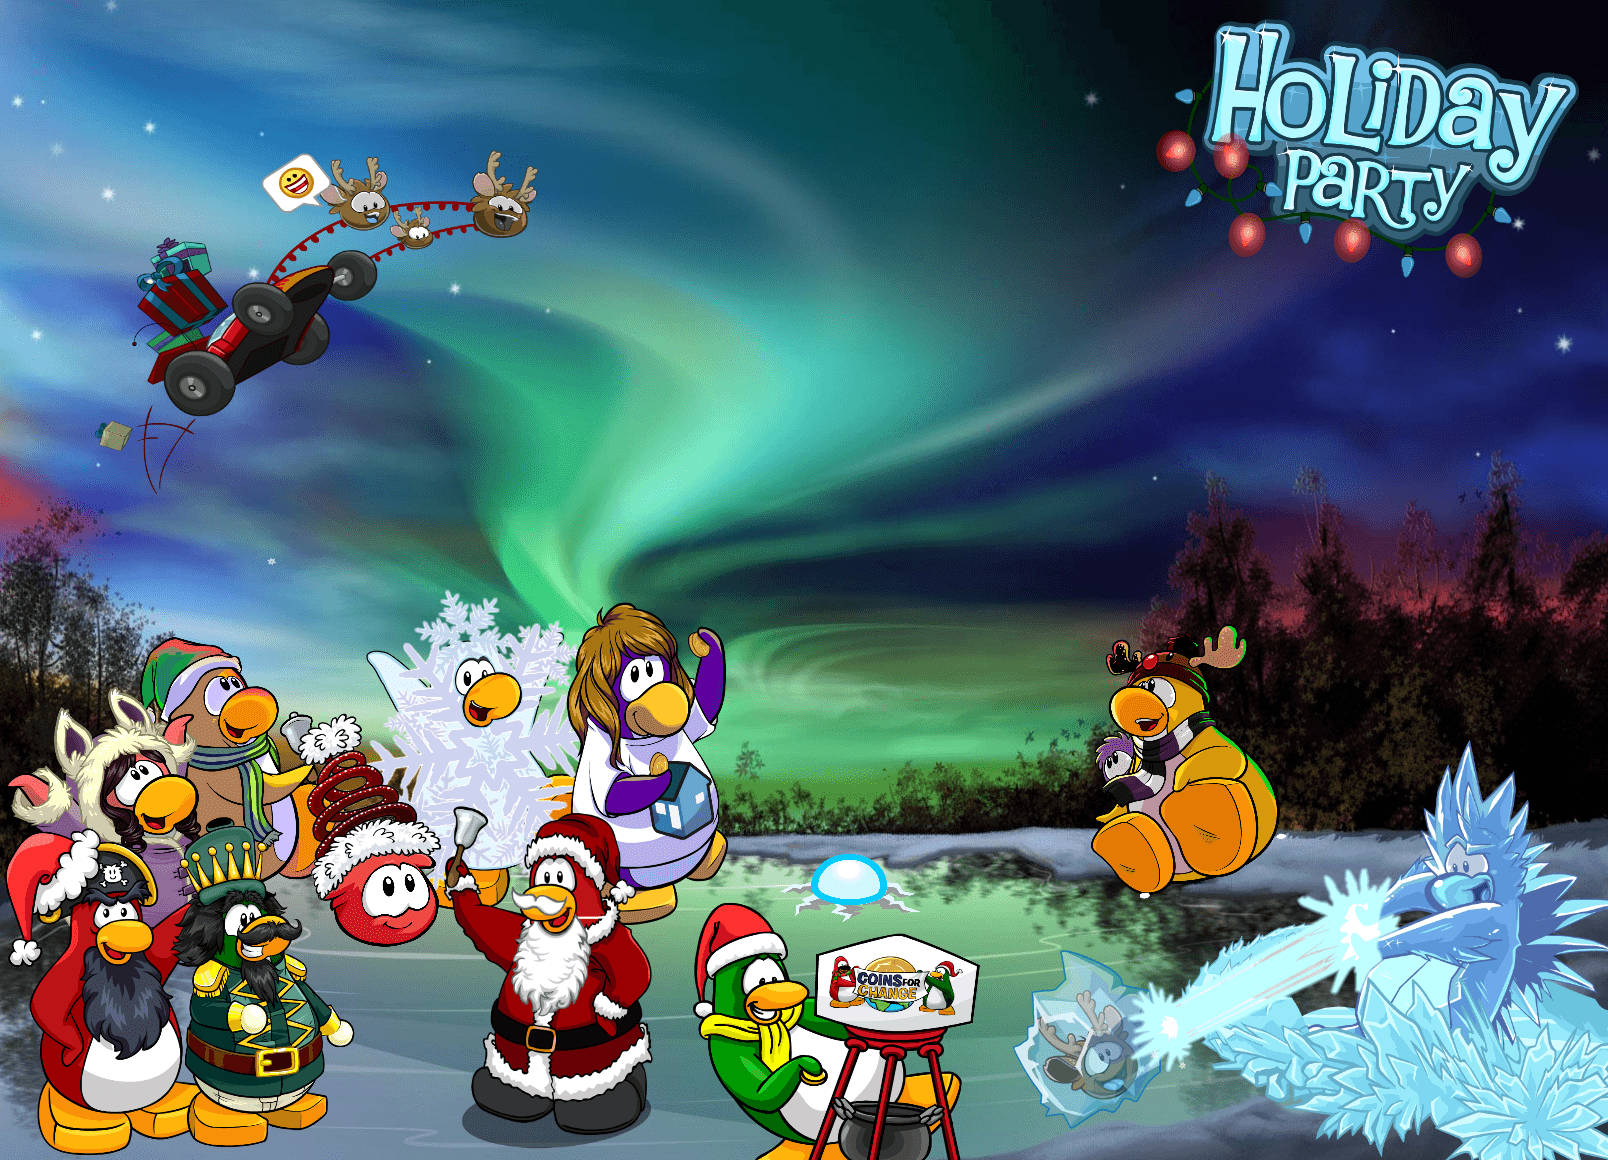 Club Penguin Christmas Party Flyer Wallpaper